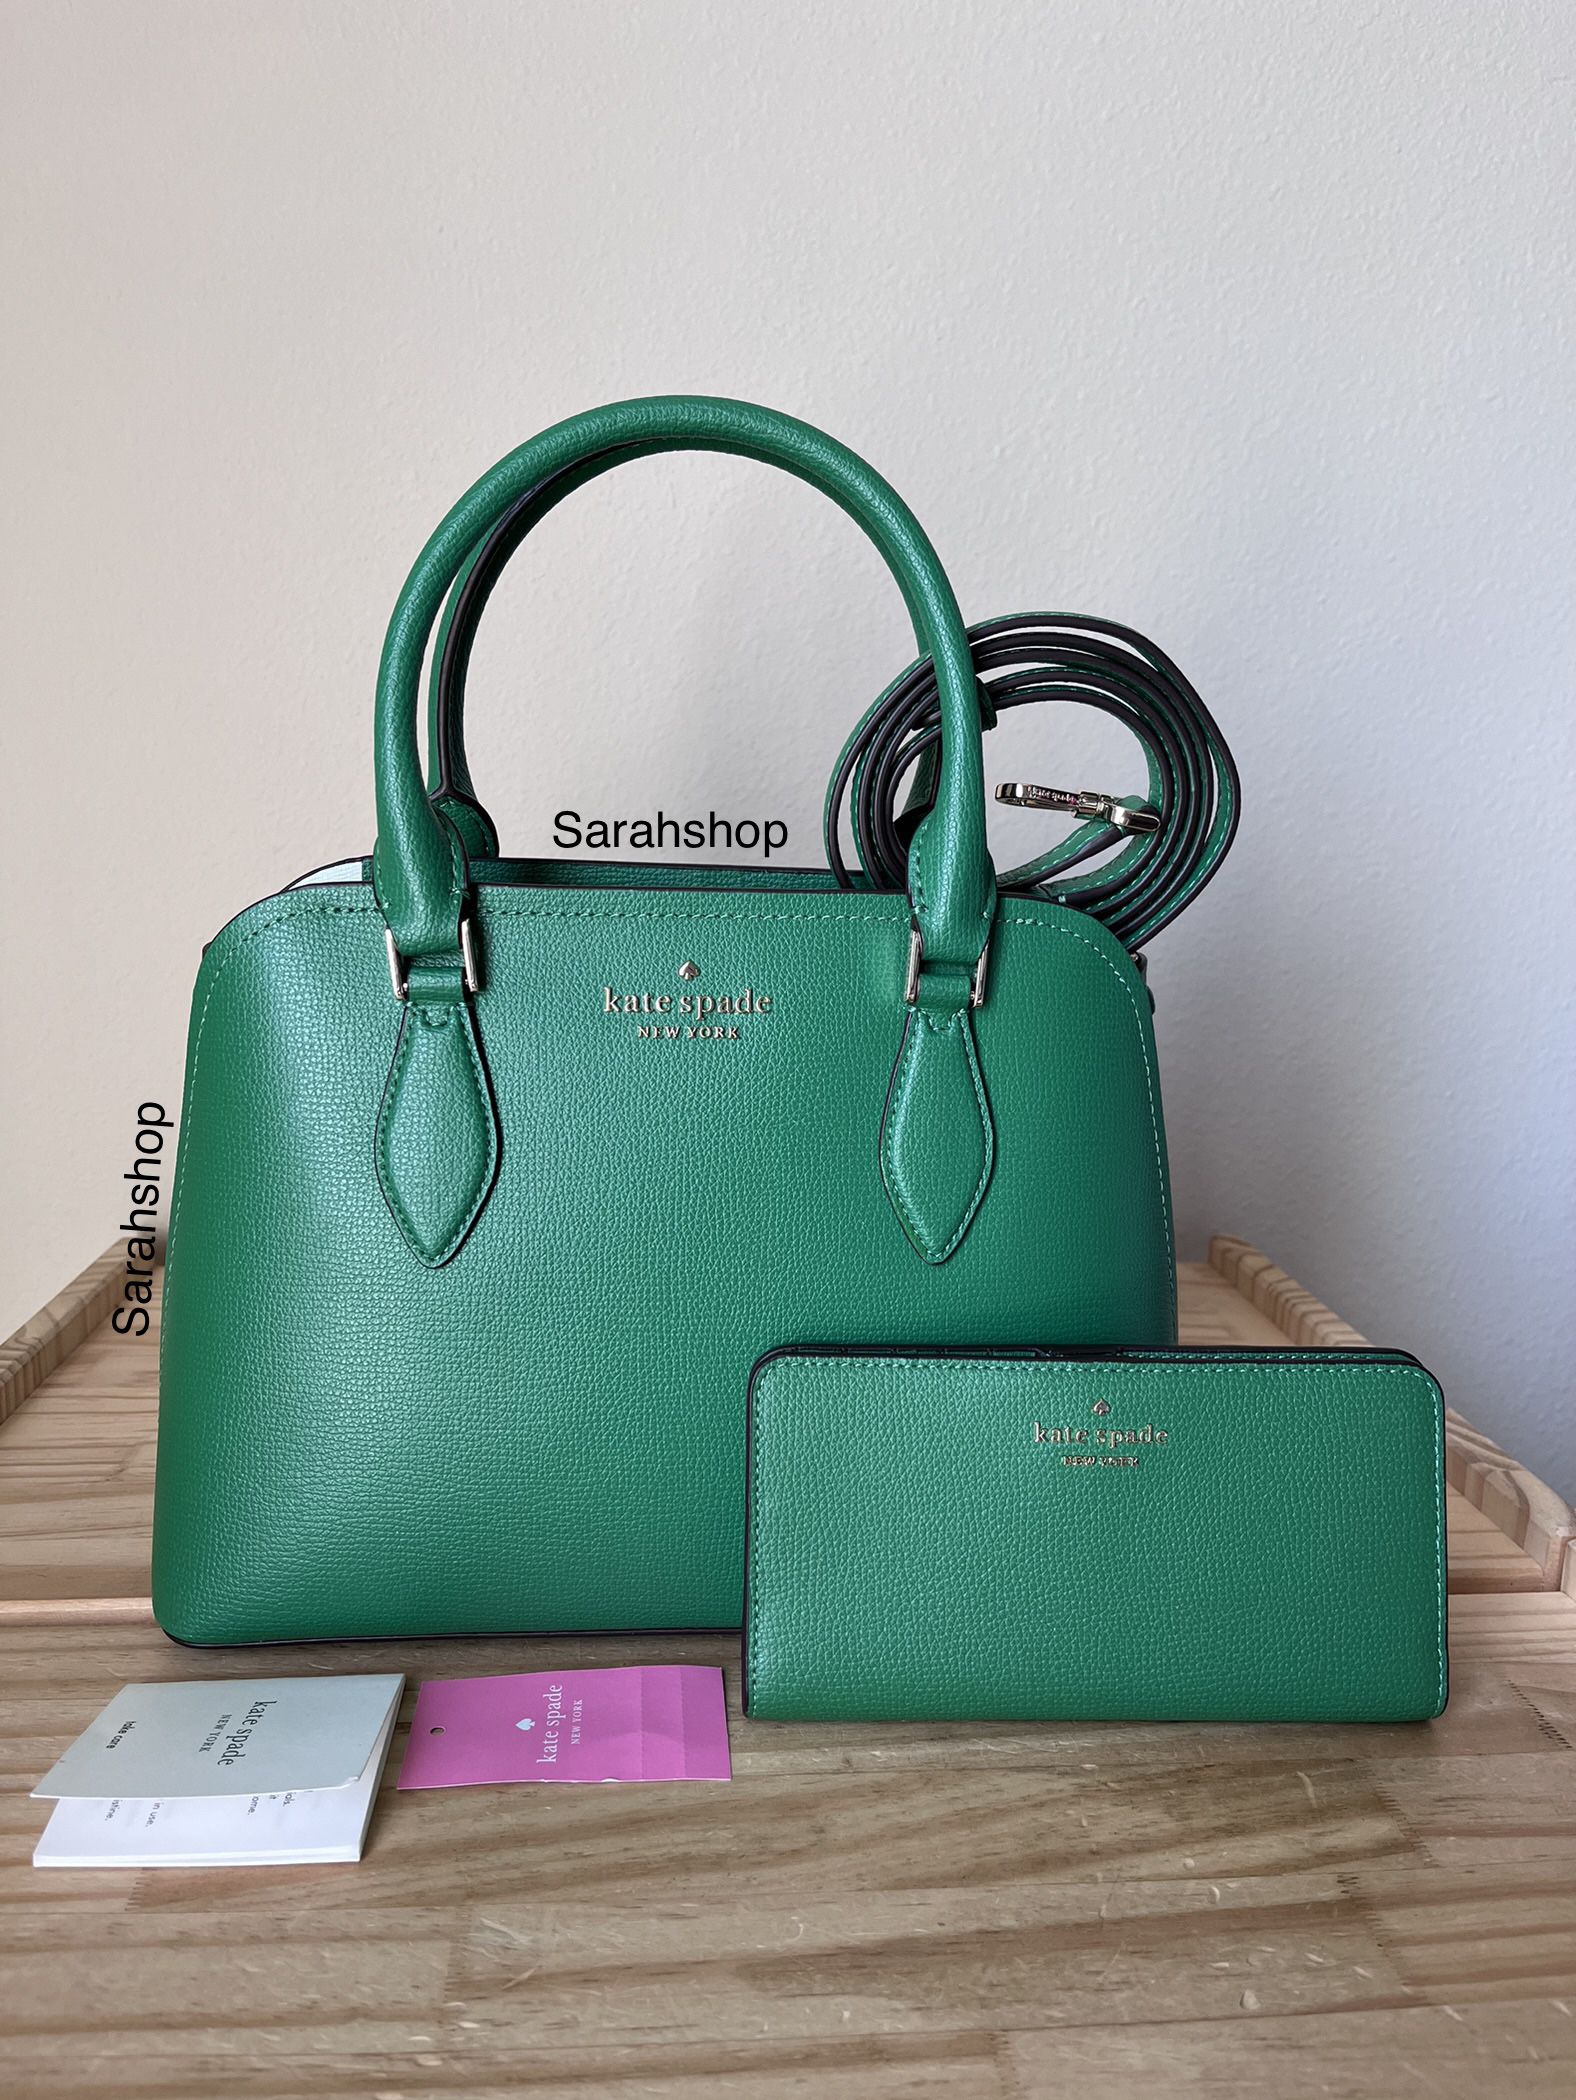 Kate Spade Purse And Wallet 